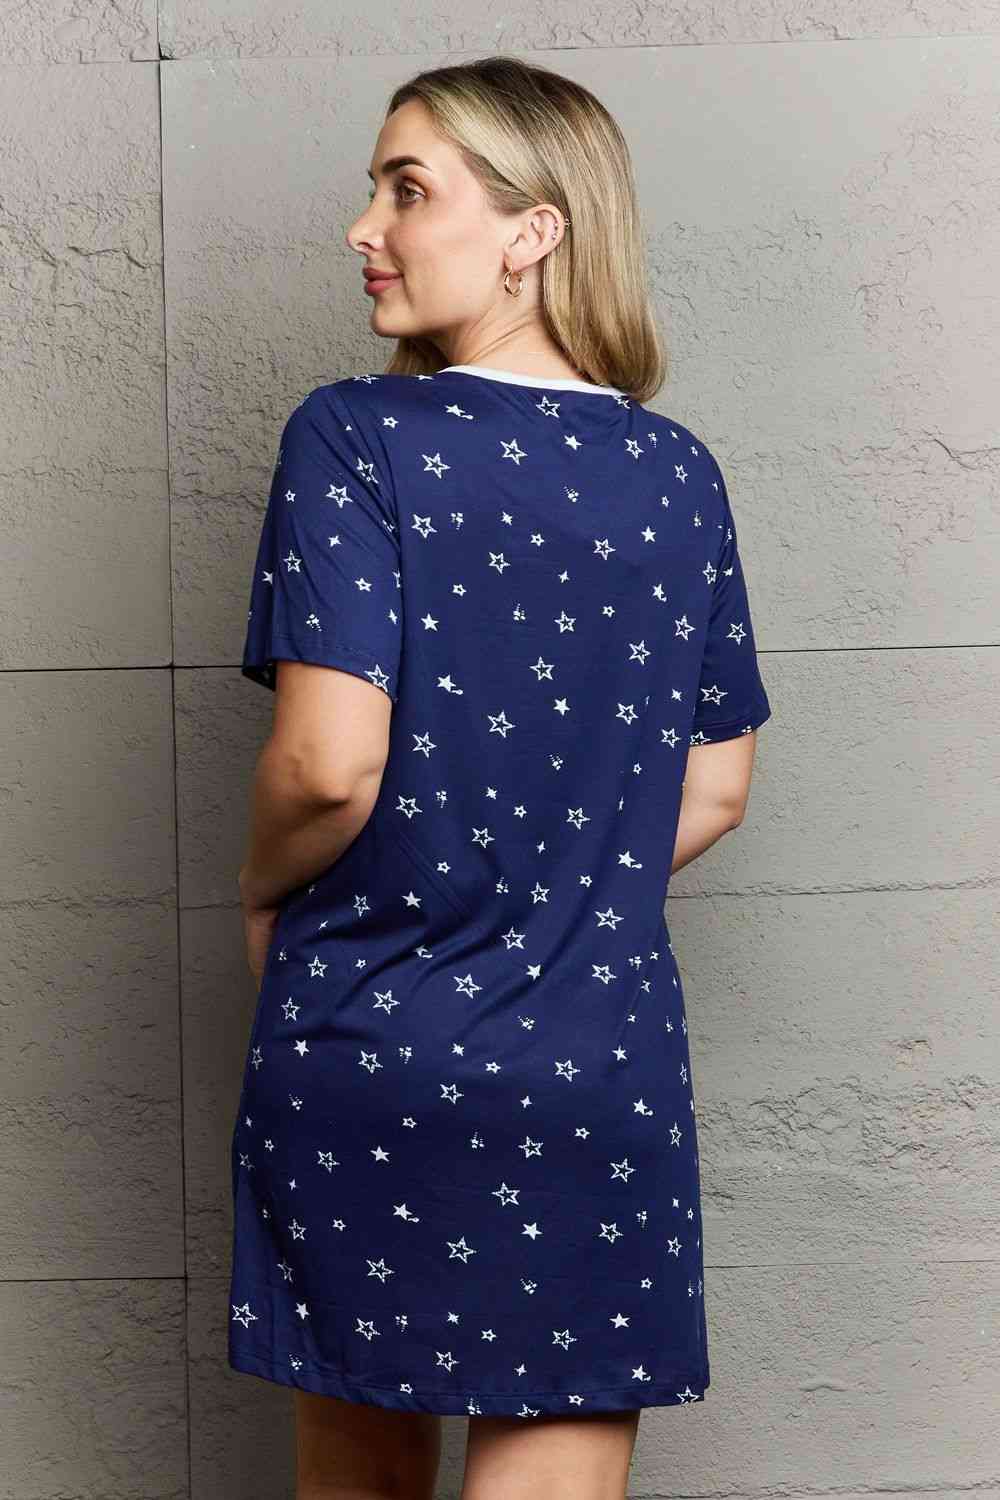 MOON NITE Quilted Quivers Button Down Sleepwear Dress Print on any thing USA/STOD clothes